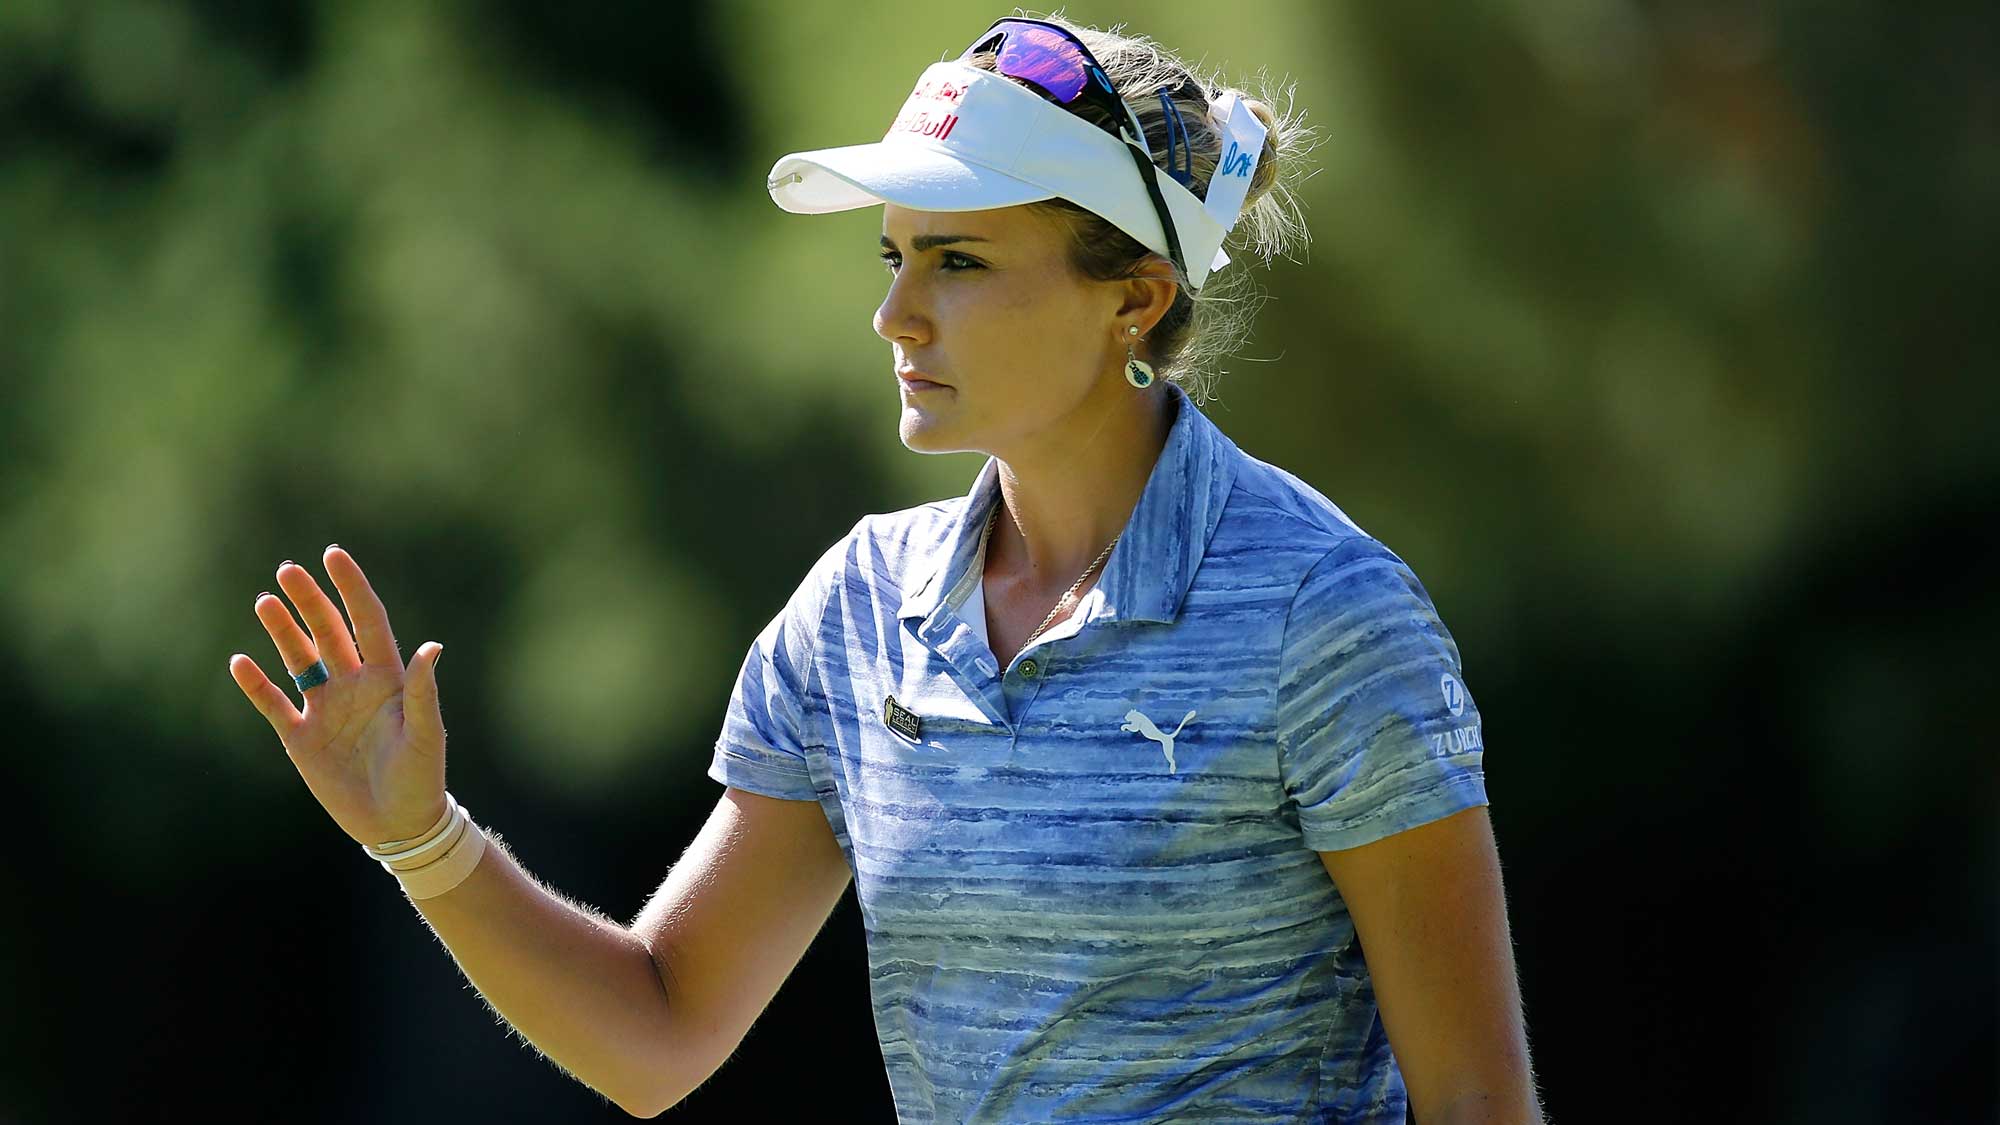 Lexi Thompson waves to the crowd on the 9th hole during the first round of the LPGA Cambia Portland Classic